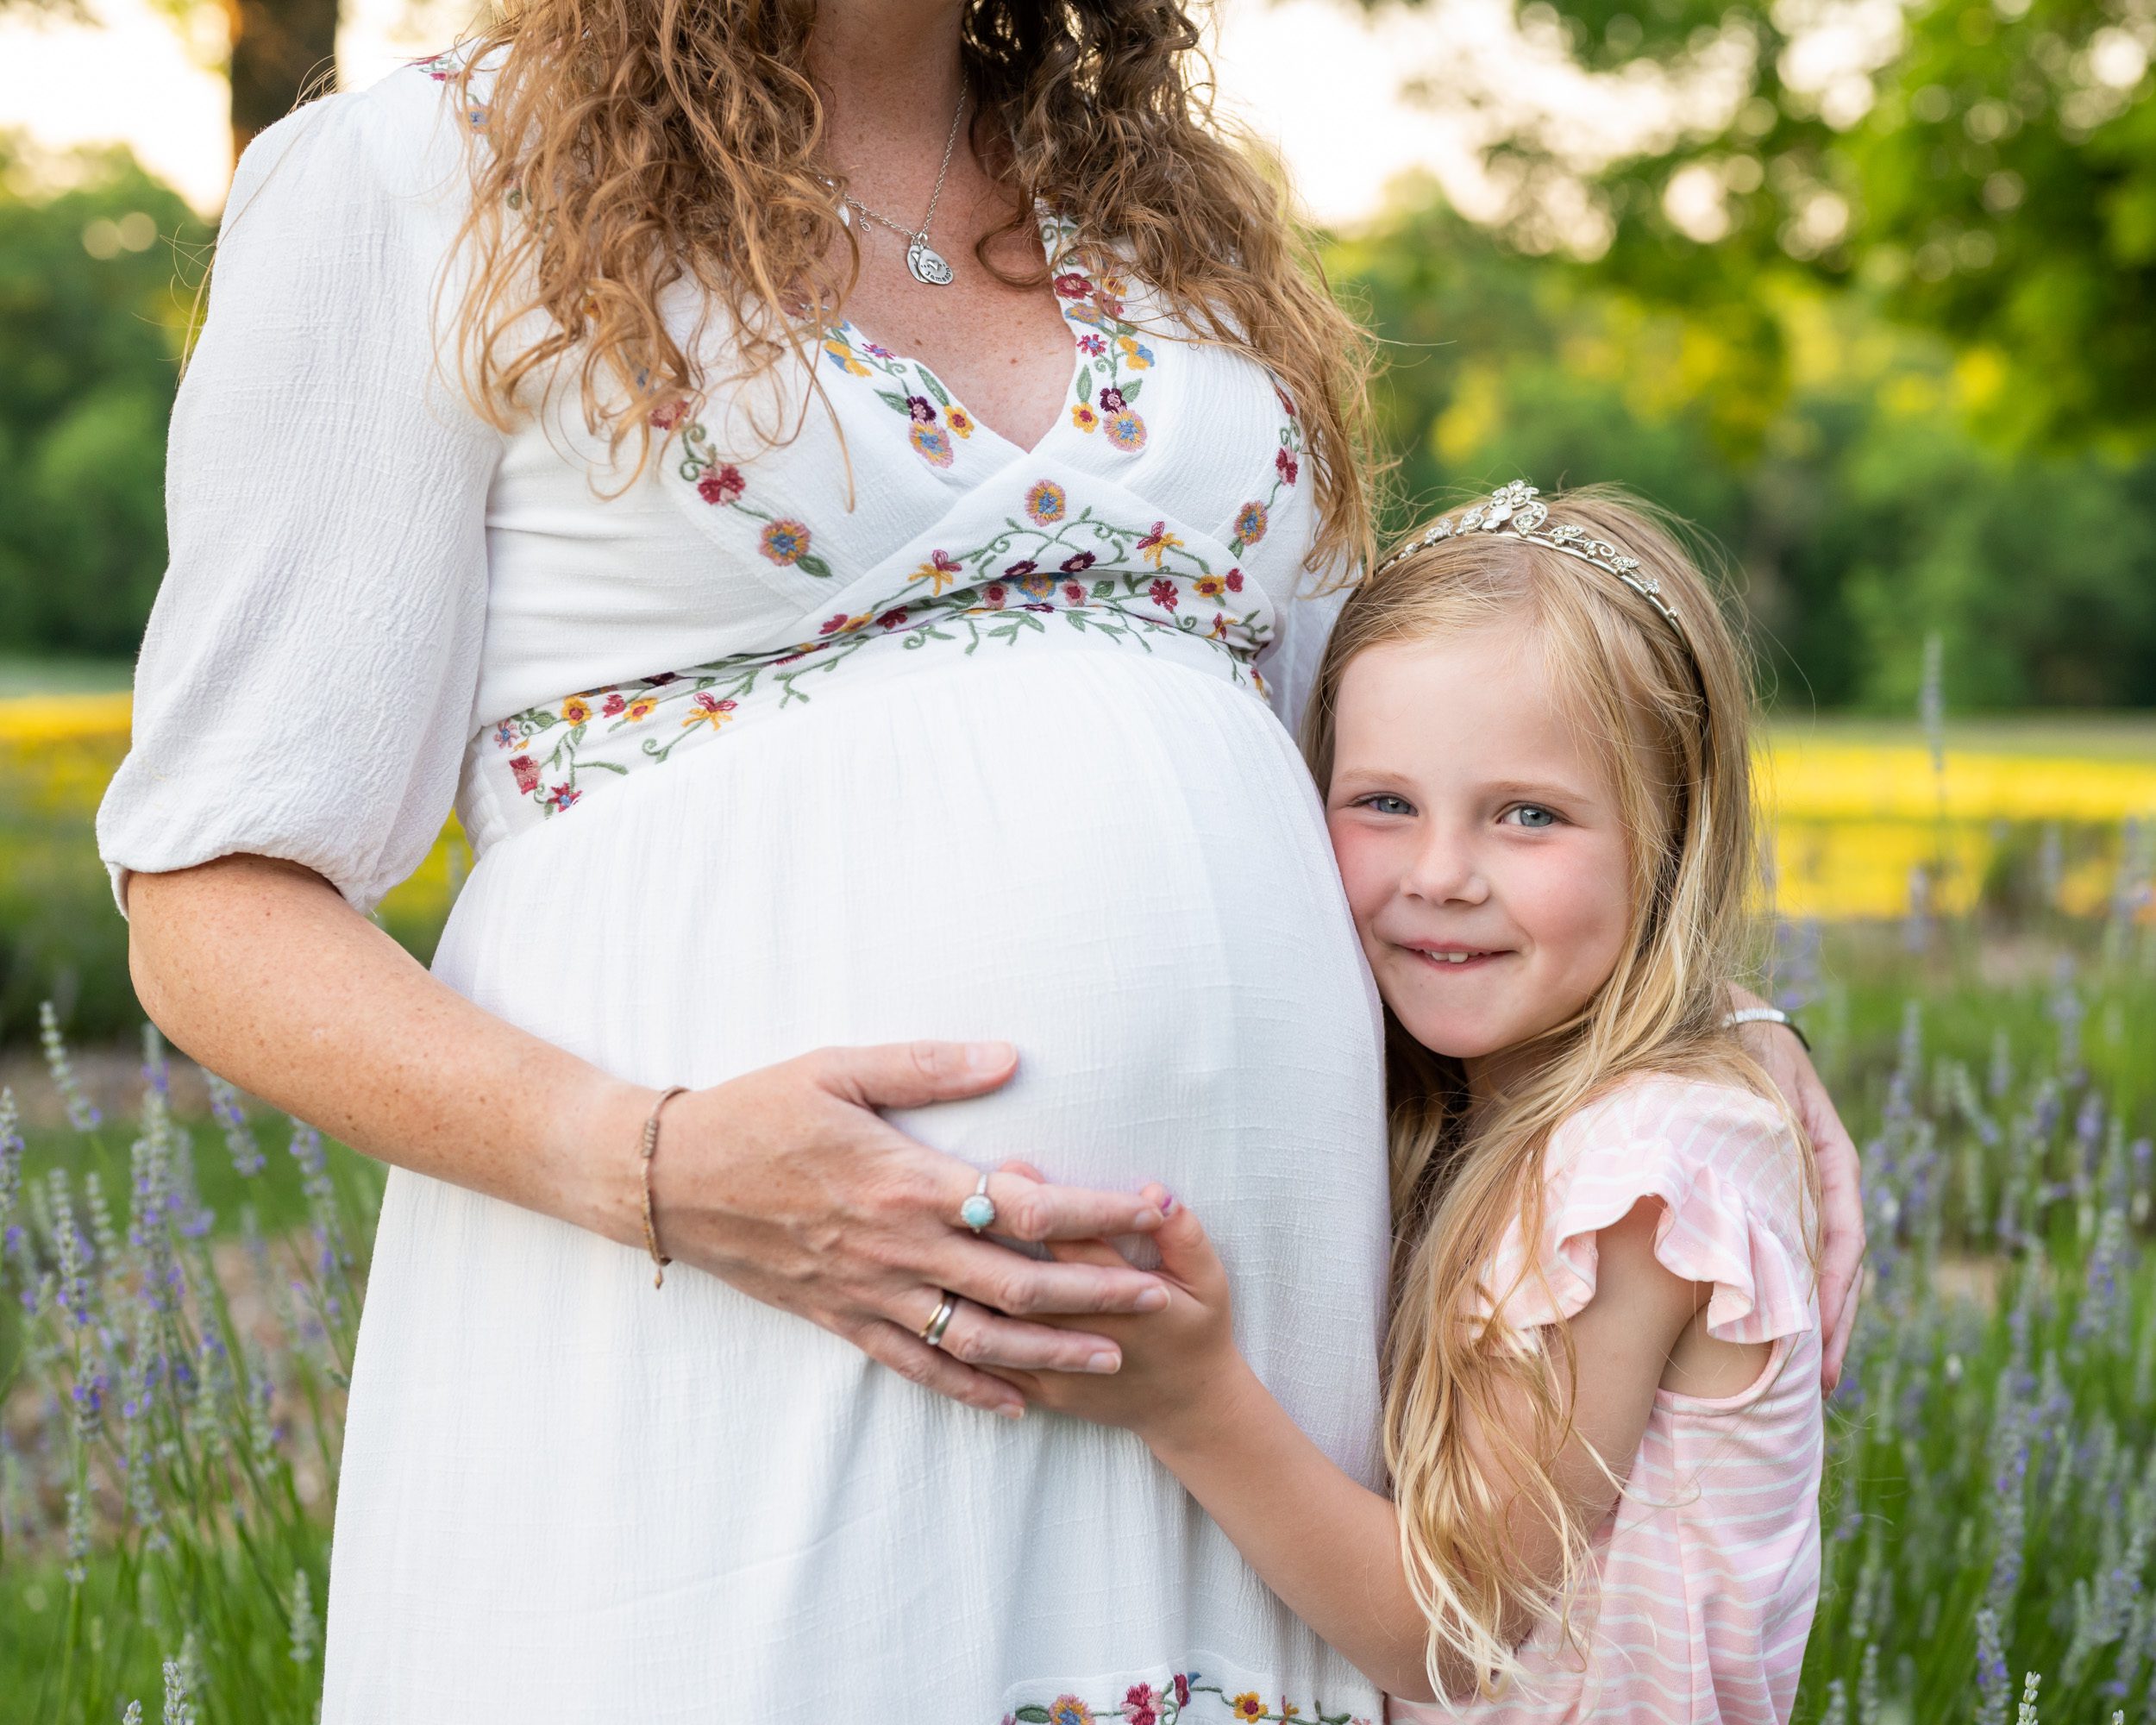 a close up of a girl hugging her expecting mom's belly and smiling at the camera during a maternity photoshoot